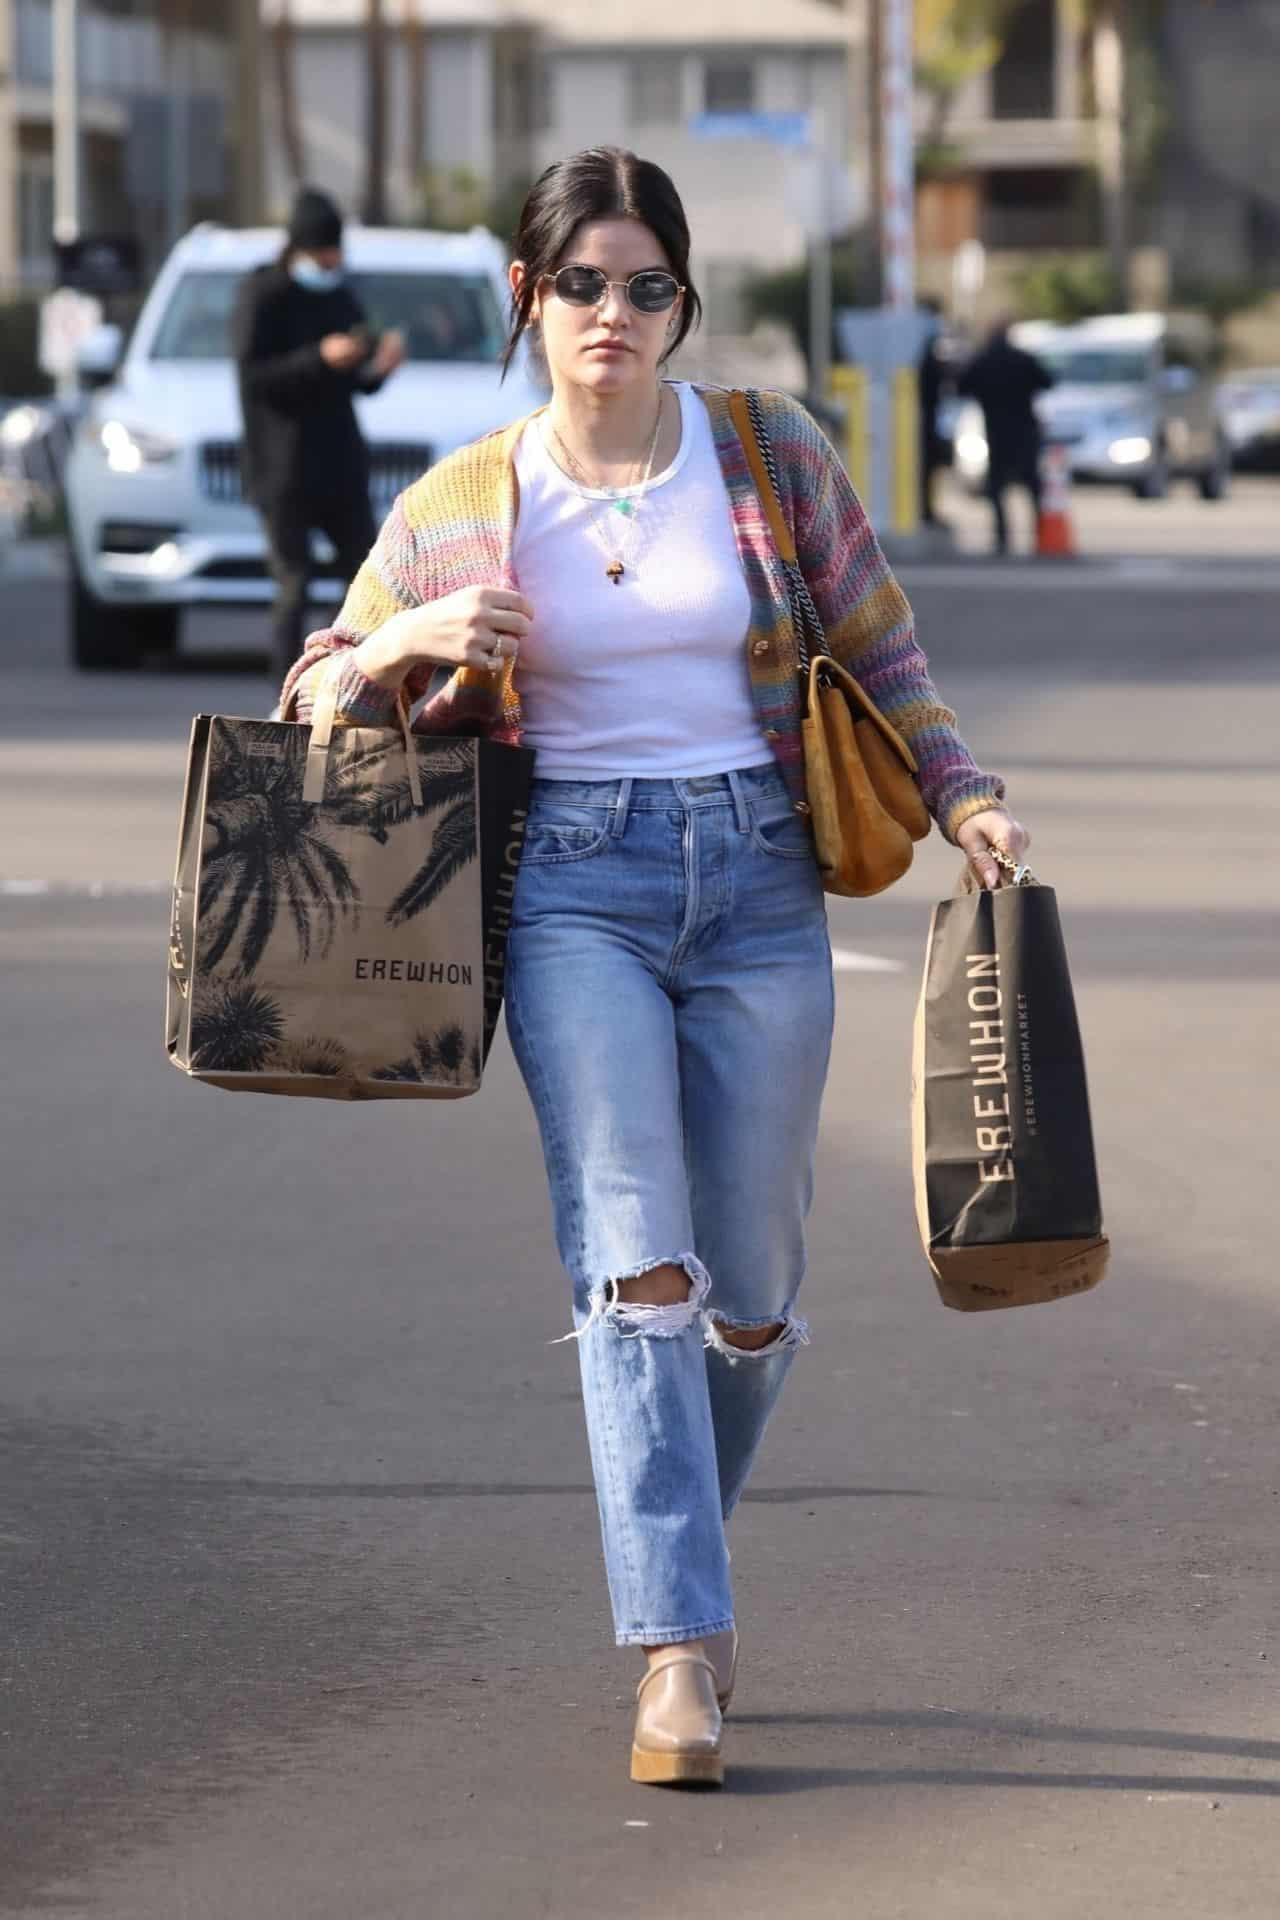 A Goes To On Erewhon Braless Hale Lucy Grocery Run Best Kaia Gerber